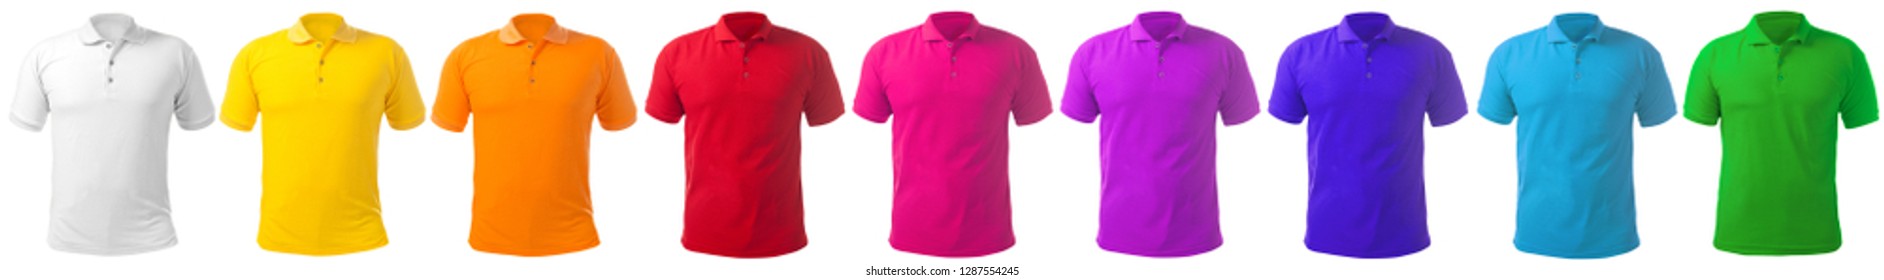 Blank collared shirt mock up template, front  view, isolated on white, plain t-shirt mockup in many color. Polo tee design presentation for print.